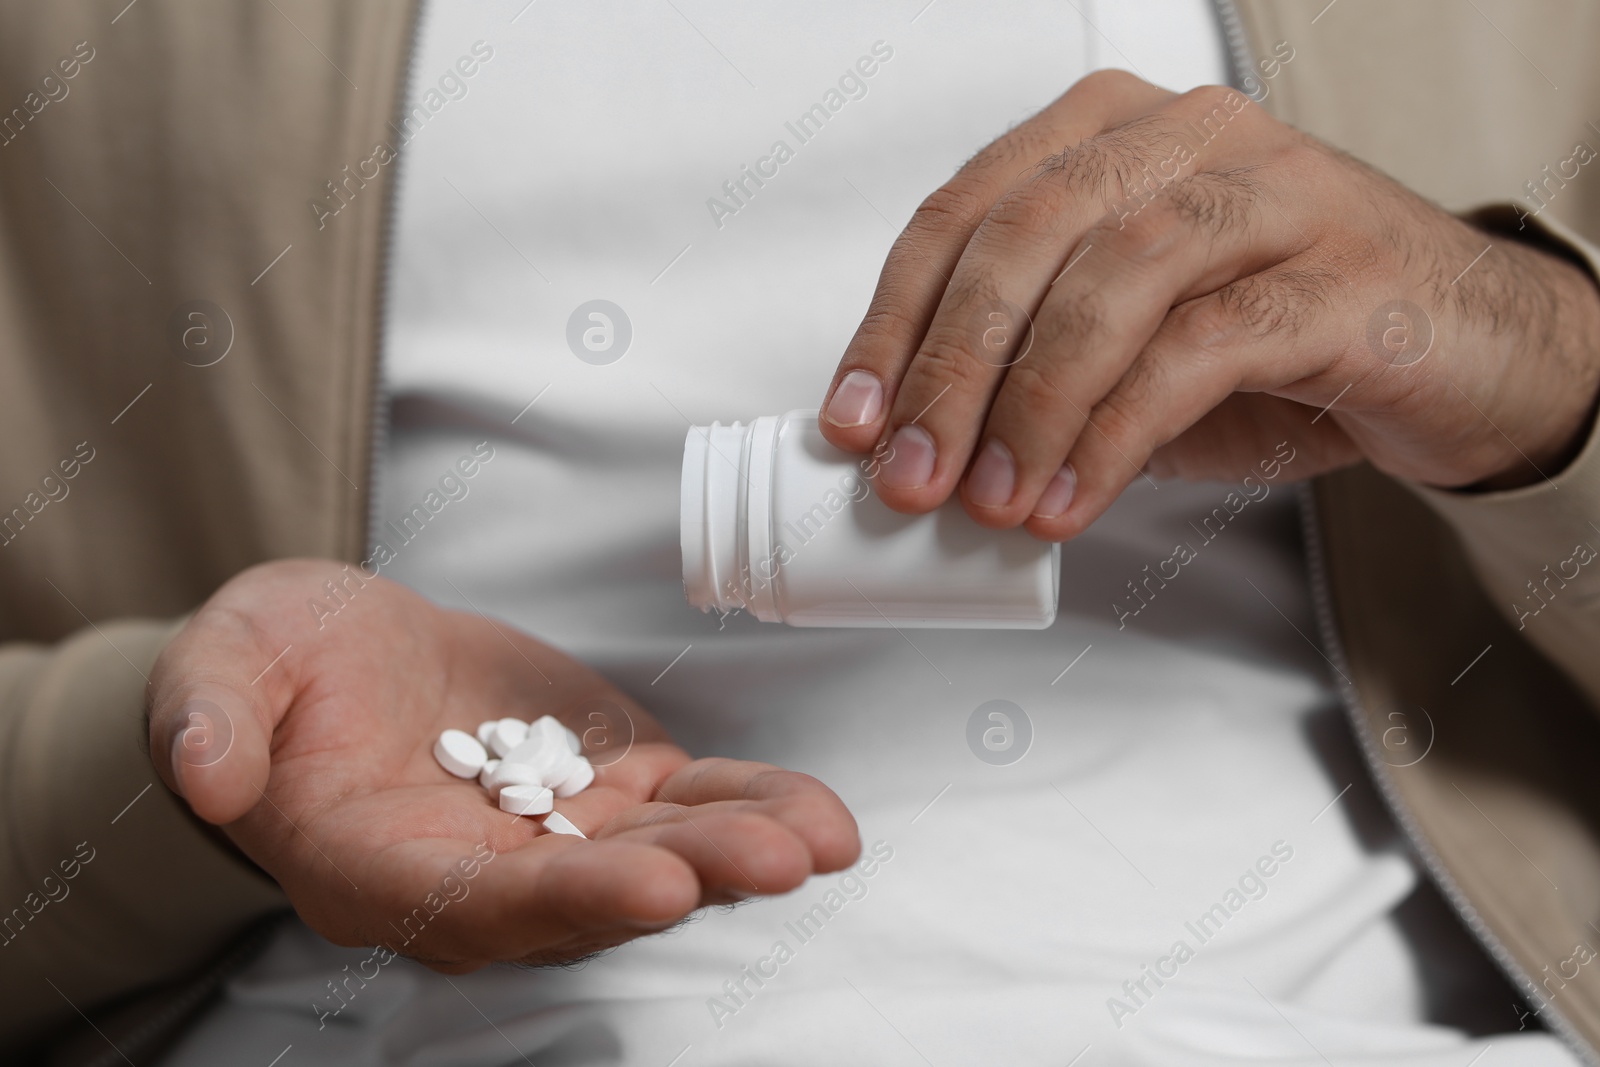 Photo of Man pouring antidepressants from bottle onto hand, closeup view